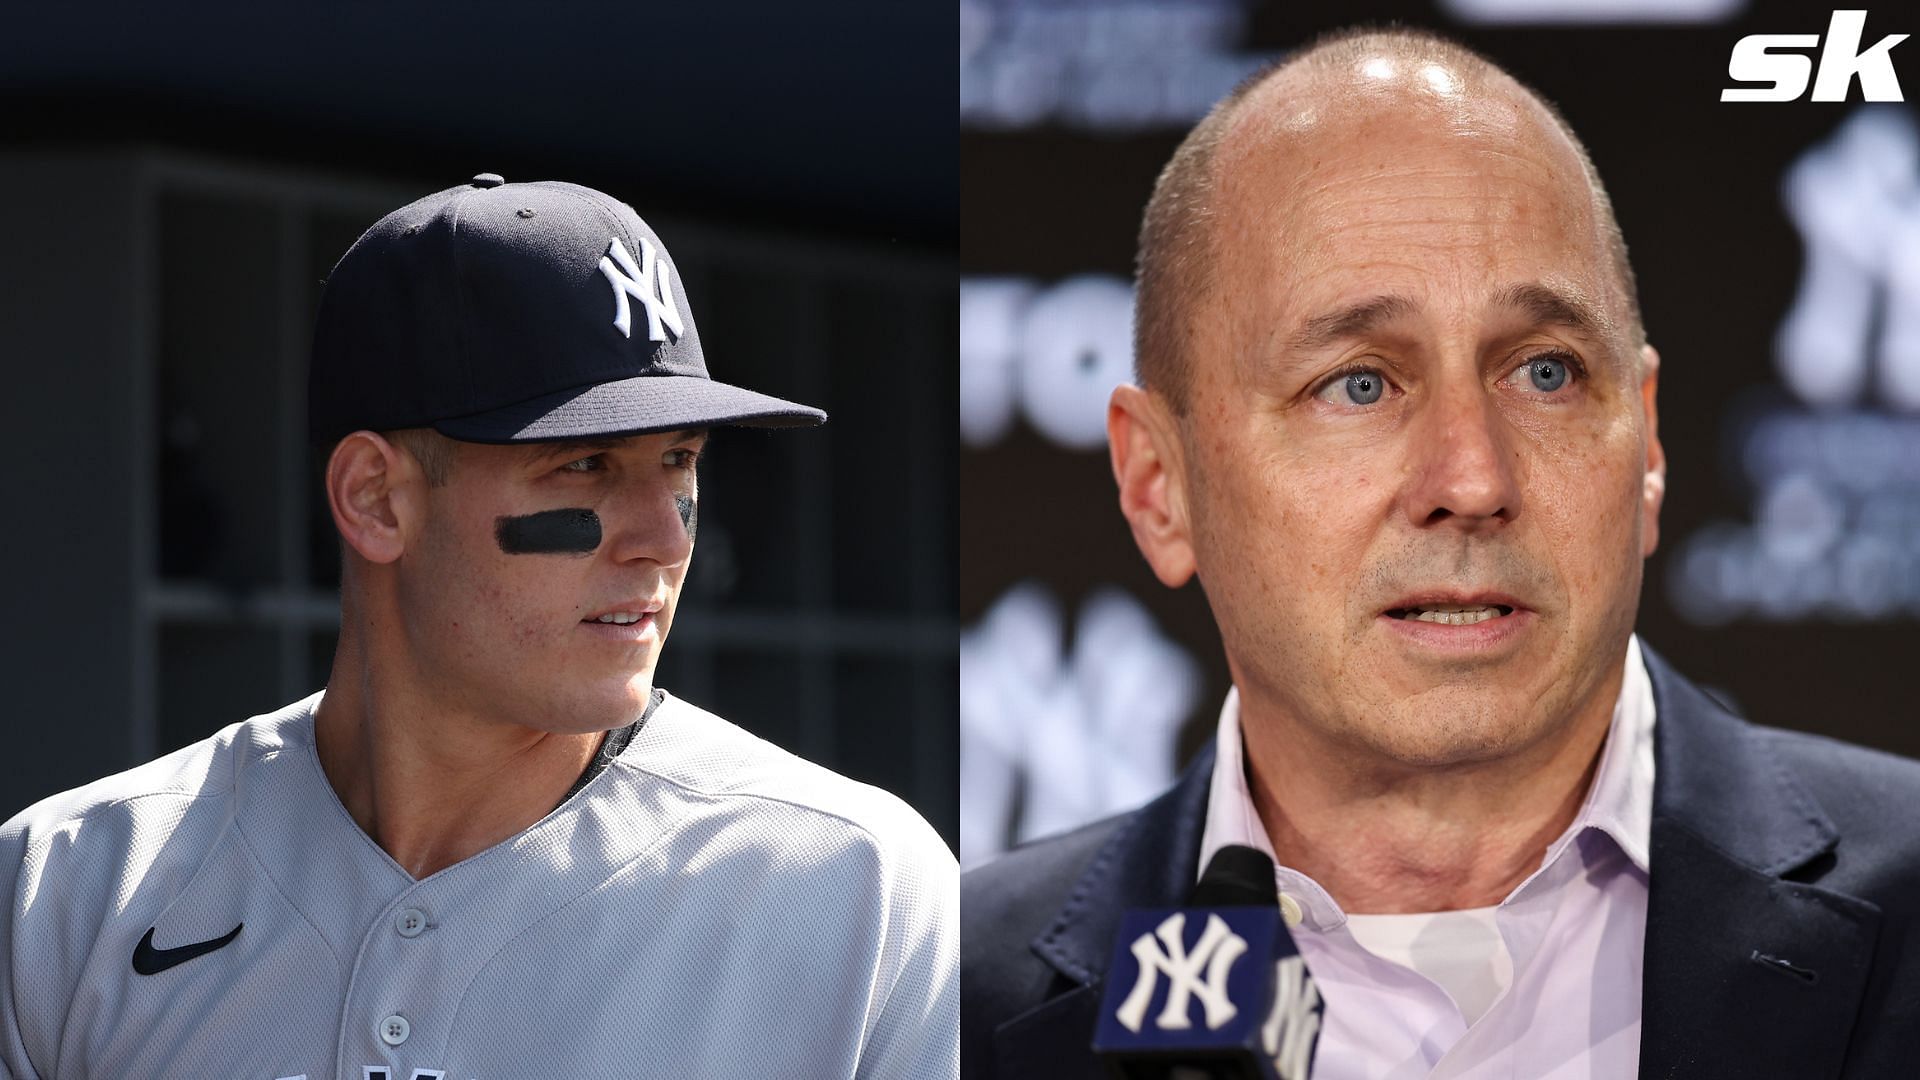 Anthony Rizzo and Brian Cashman of the New York Yankees